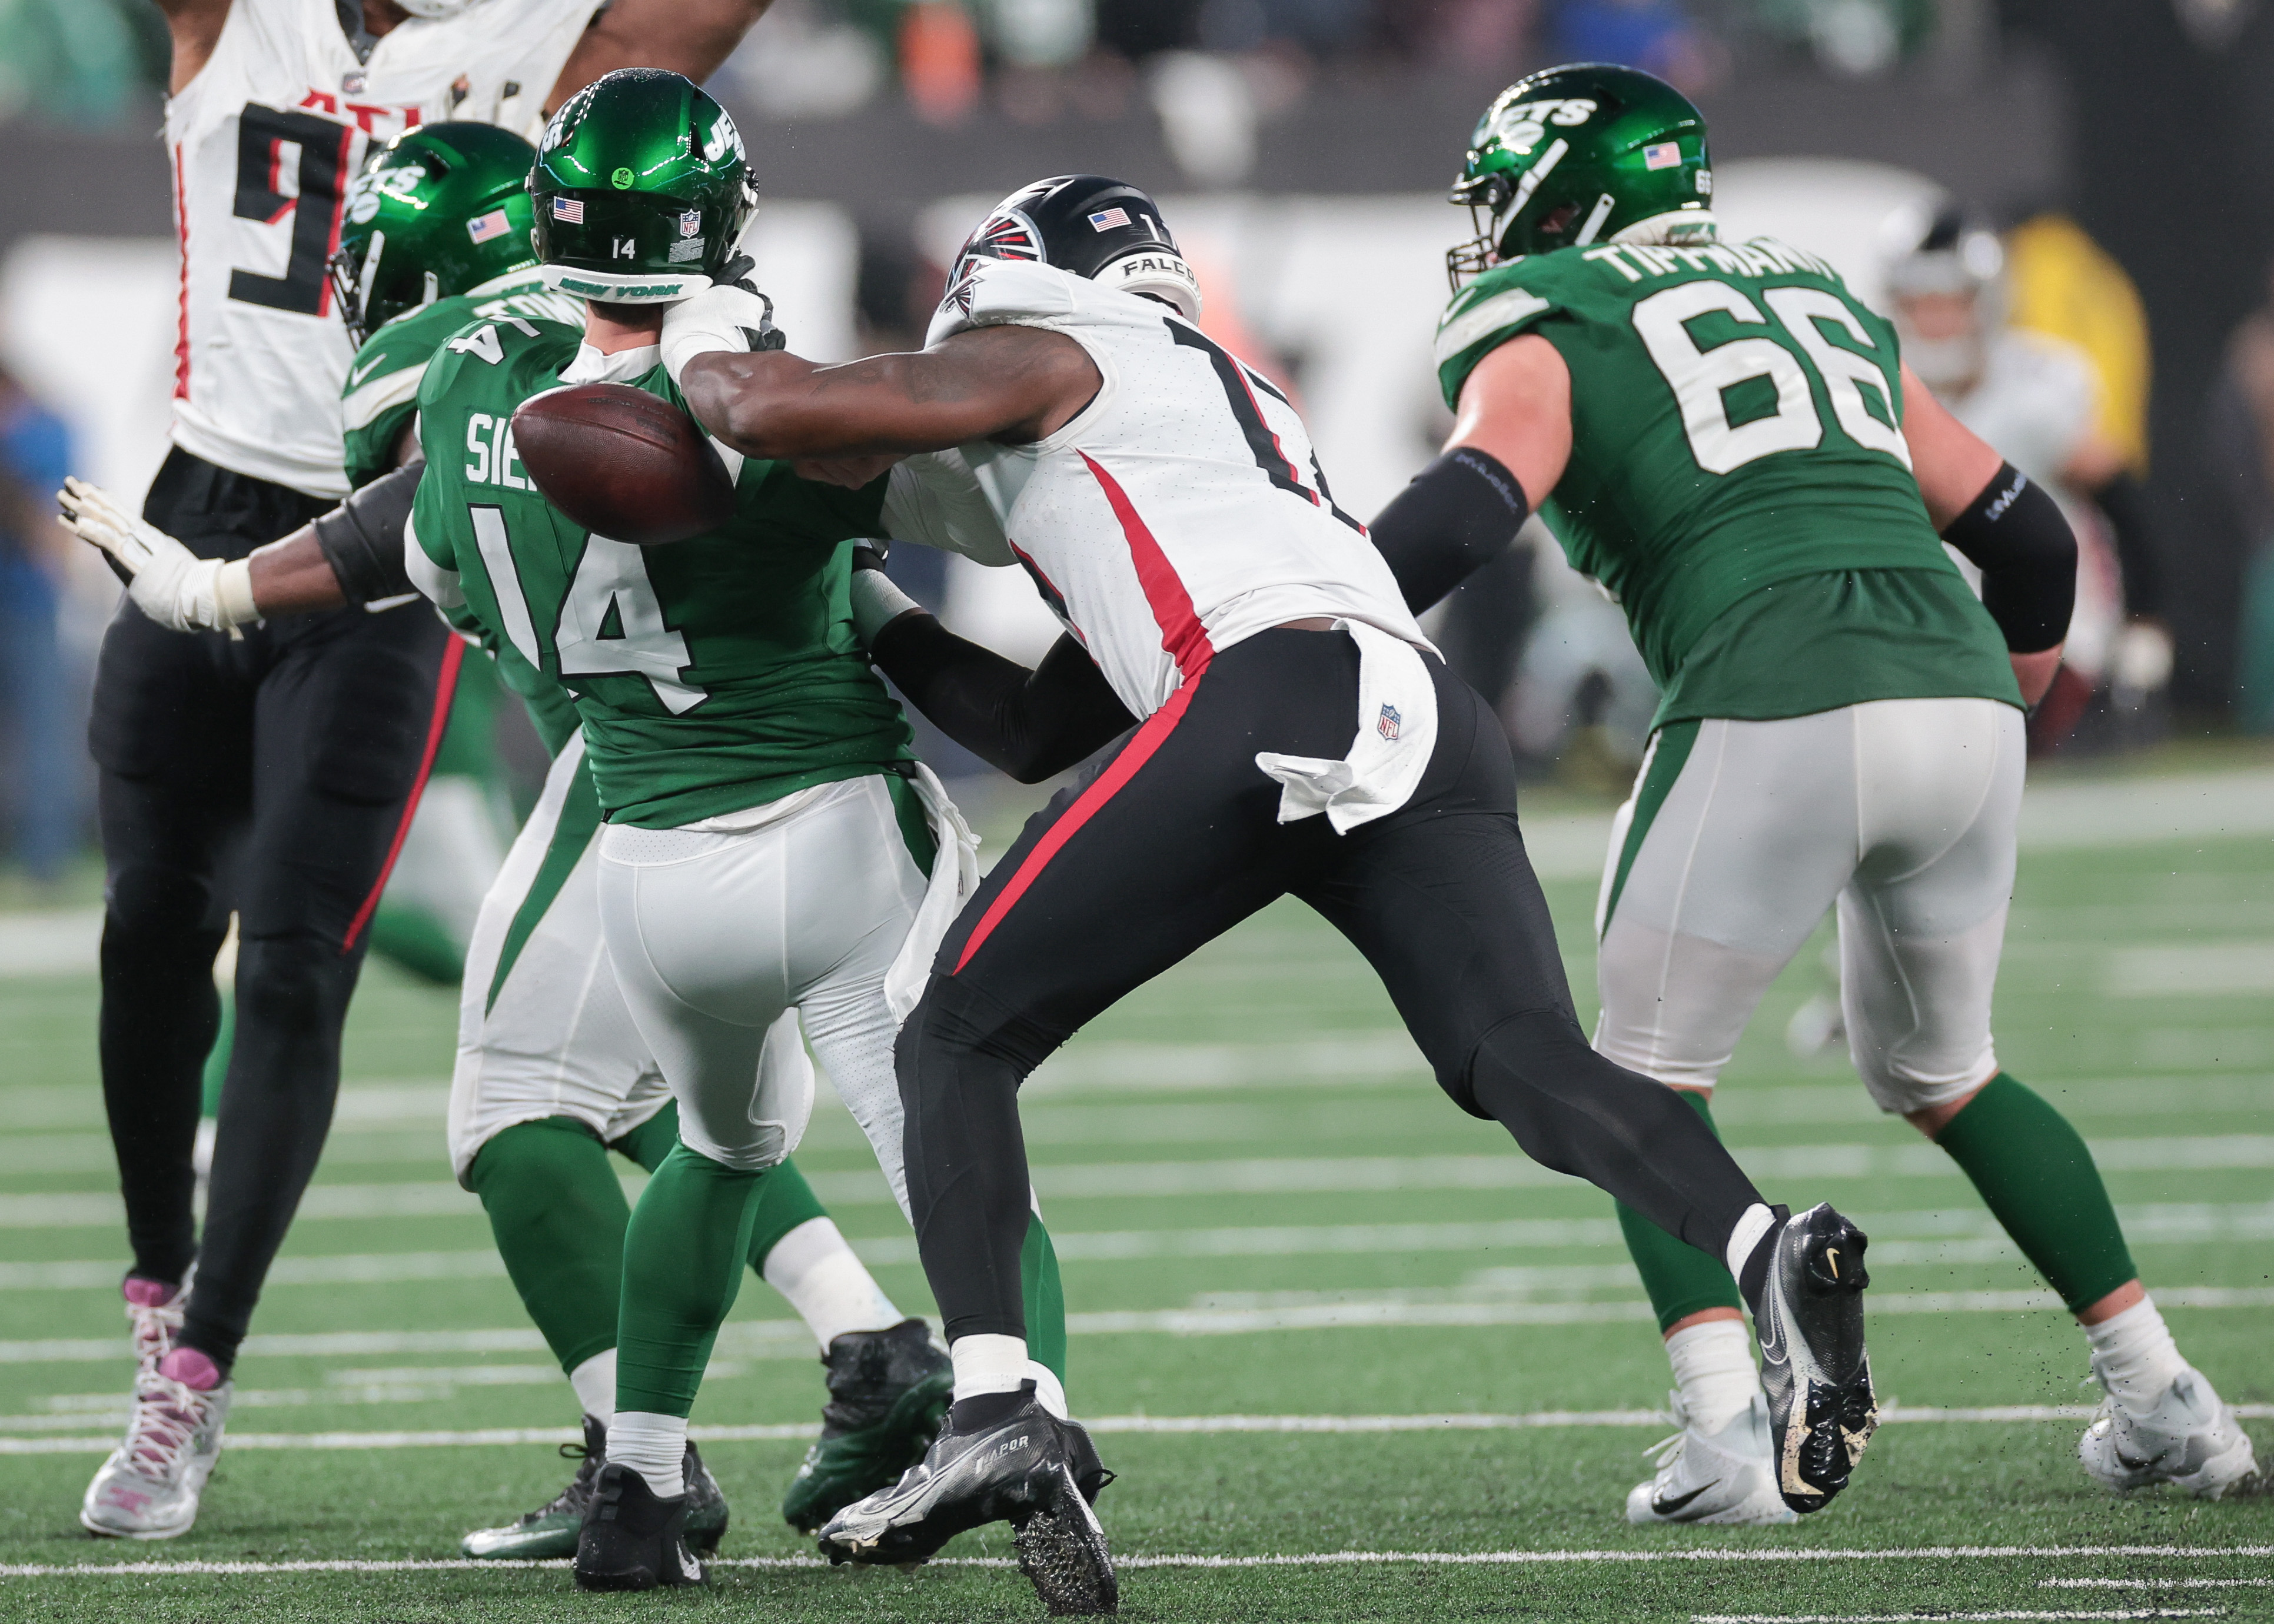 Second-year pro Arnold Ebiketie leads the Atlanta Falcons with 5.5 sacks.